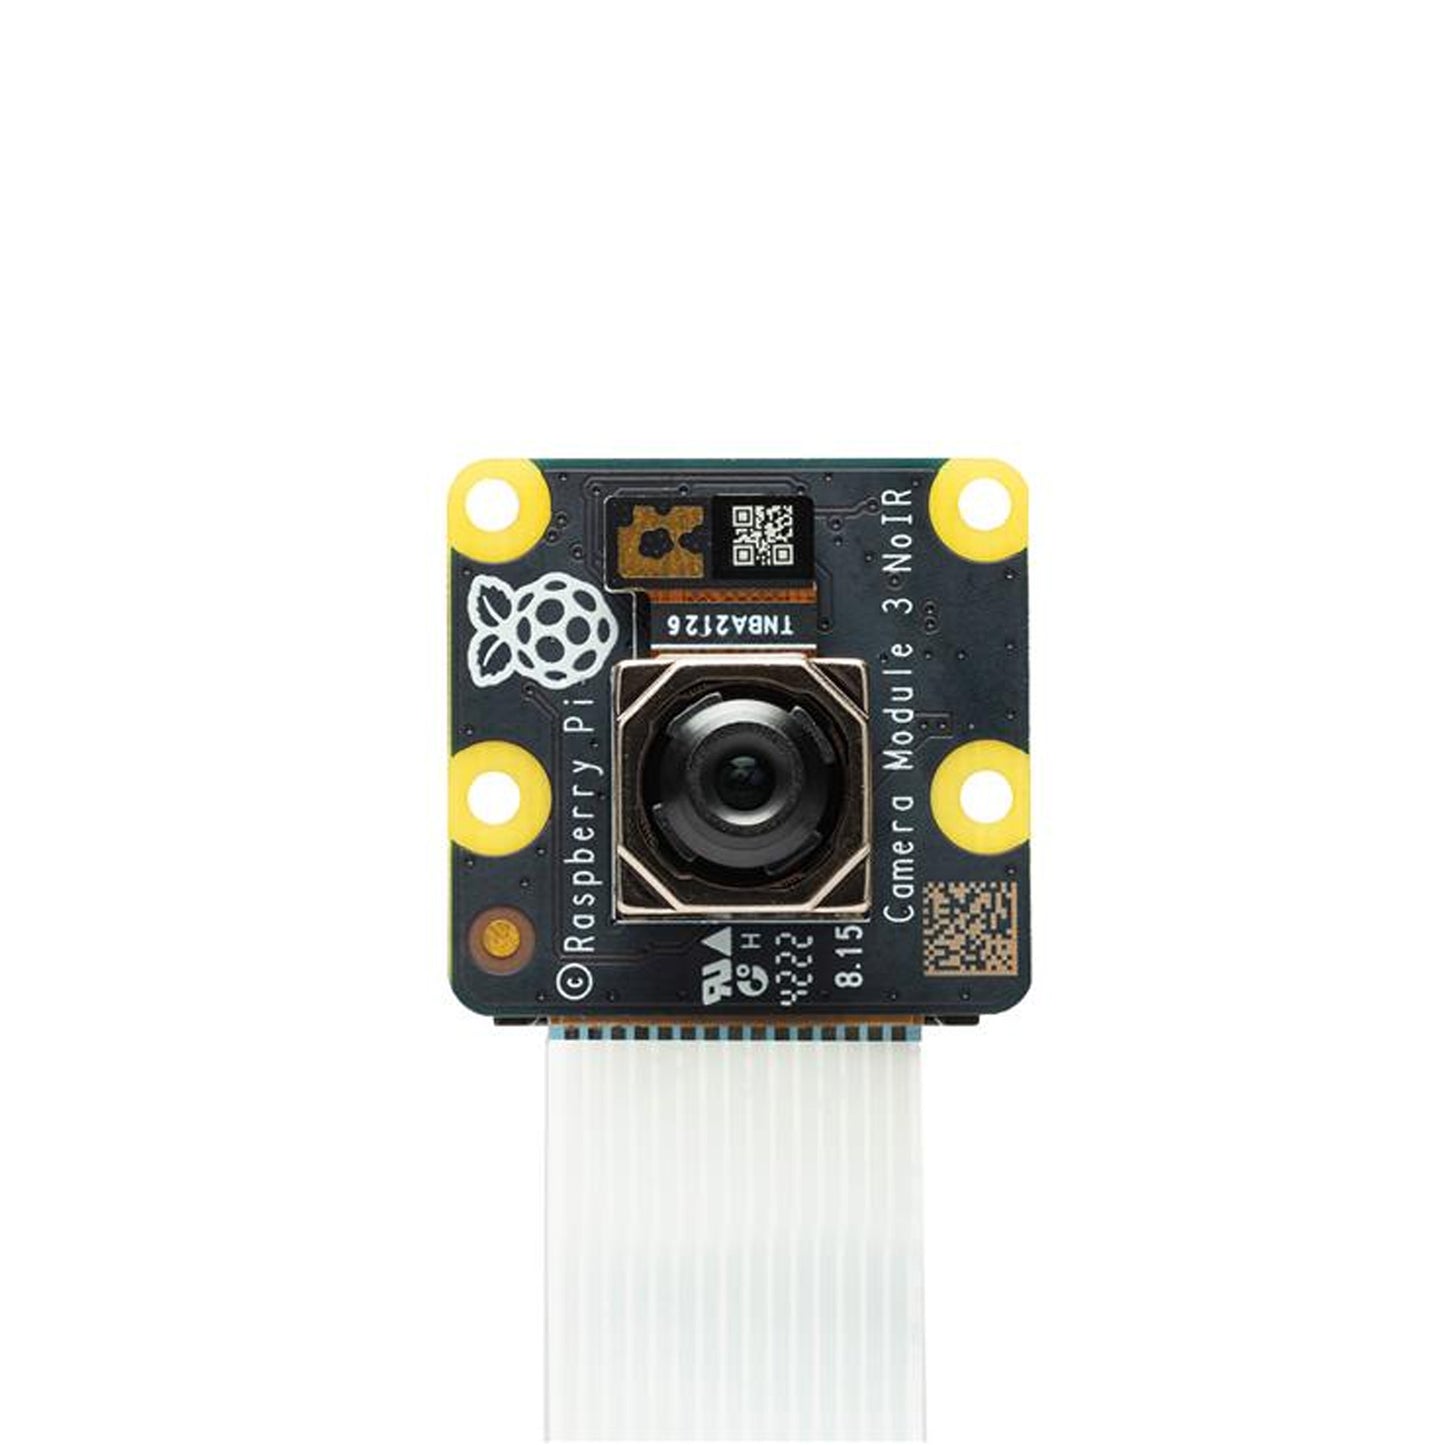 Official Raspberry Pi Camera Module 3 with 75°/ 120° 12mp Sony IMX708 Image Sensor - REES52